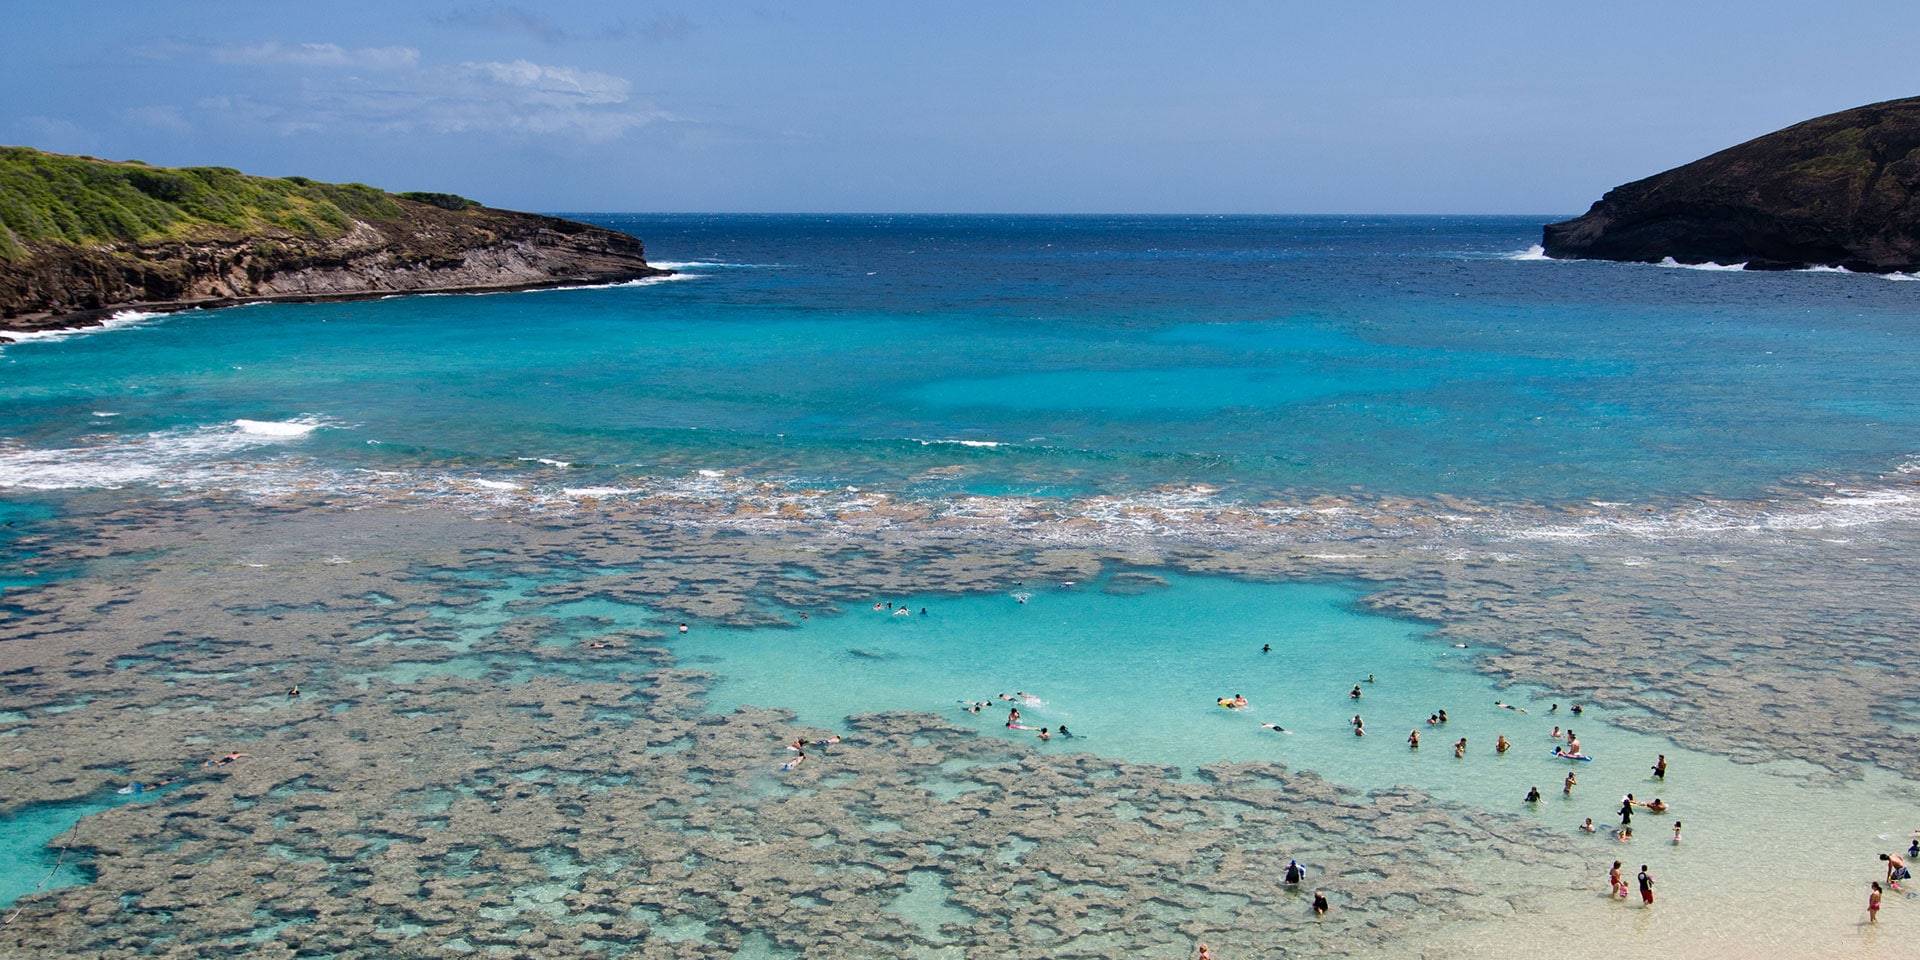 Ready to Make a Splash? These 10 Beaches Promise to Deliver